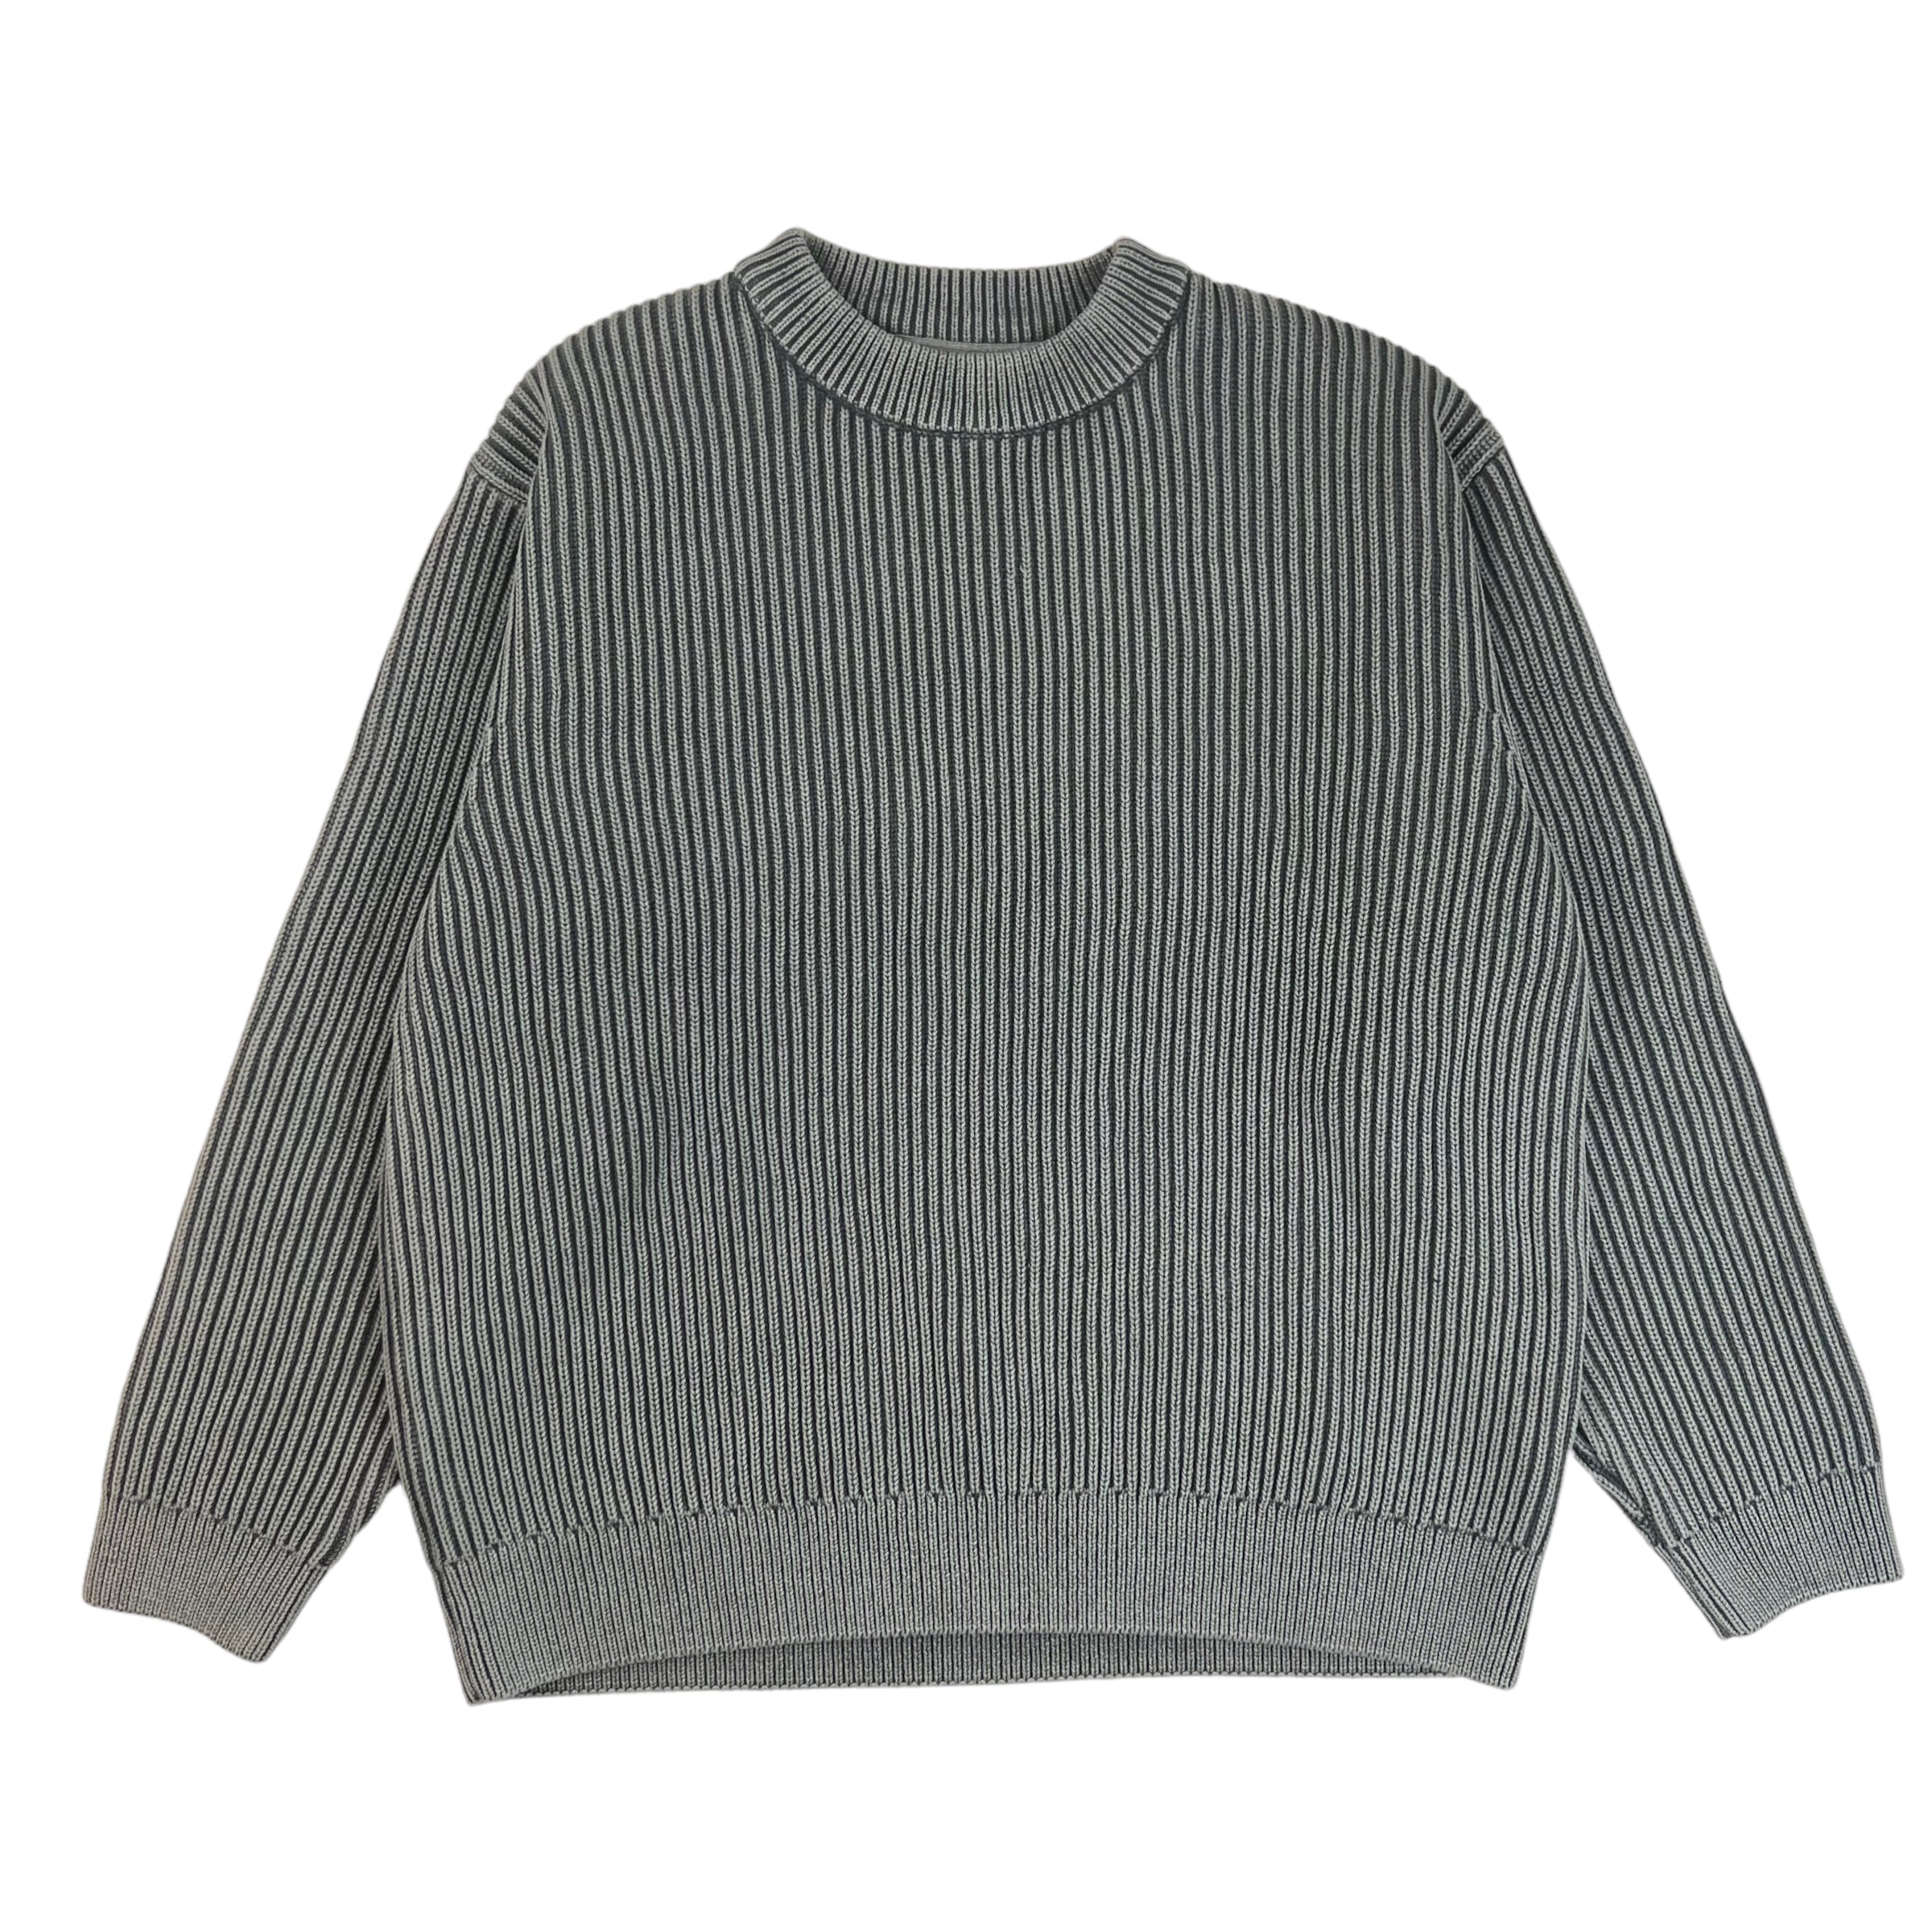 Kith Garment Dye Cable Knit Sweater